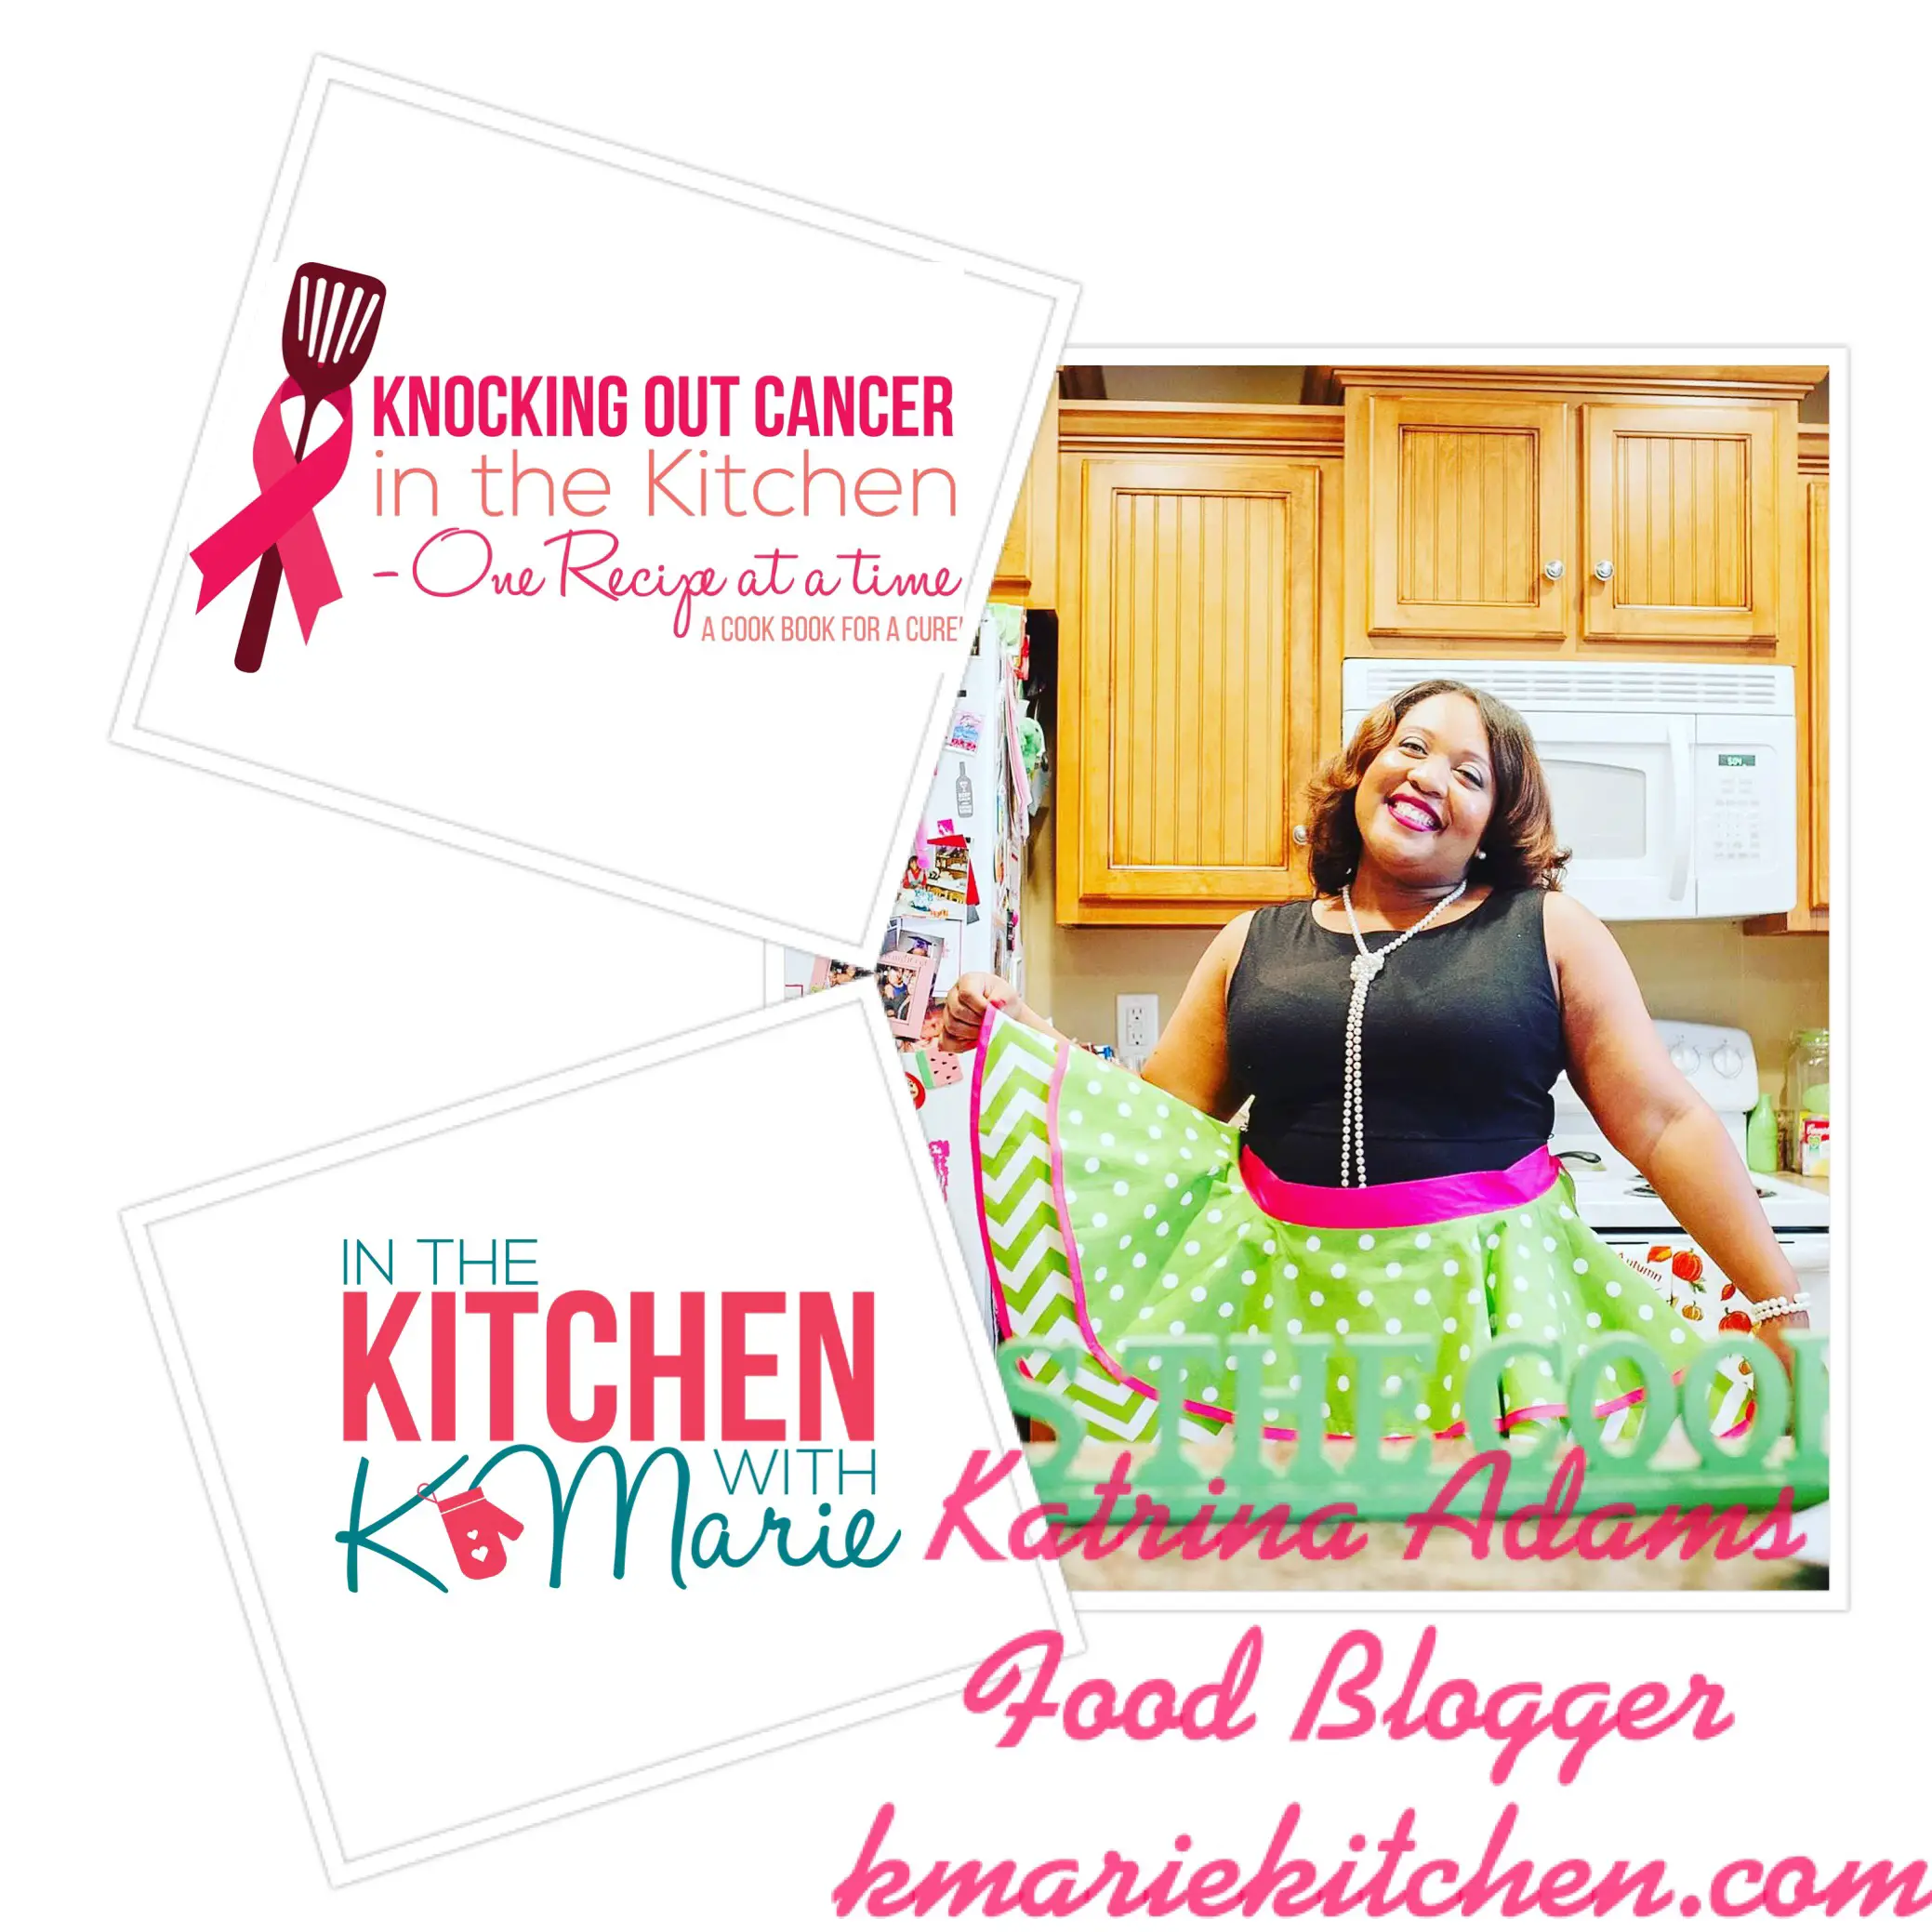 I am so excited to announce my first cookbook "Knocking Out Cancer in the Kitchen". I have had the vision of writing this book for years, so I am so thankful to see it coming to light.